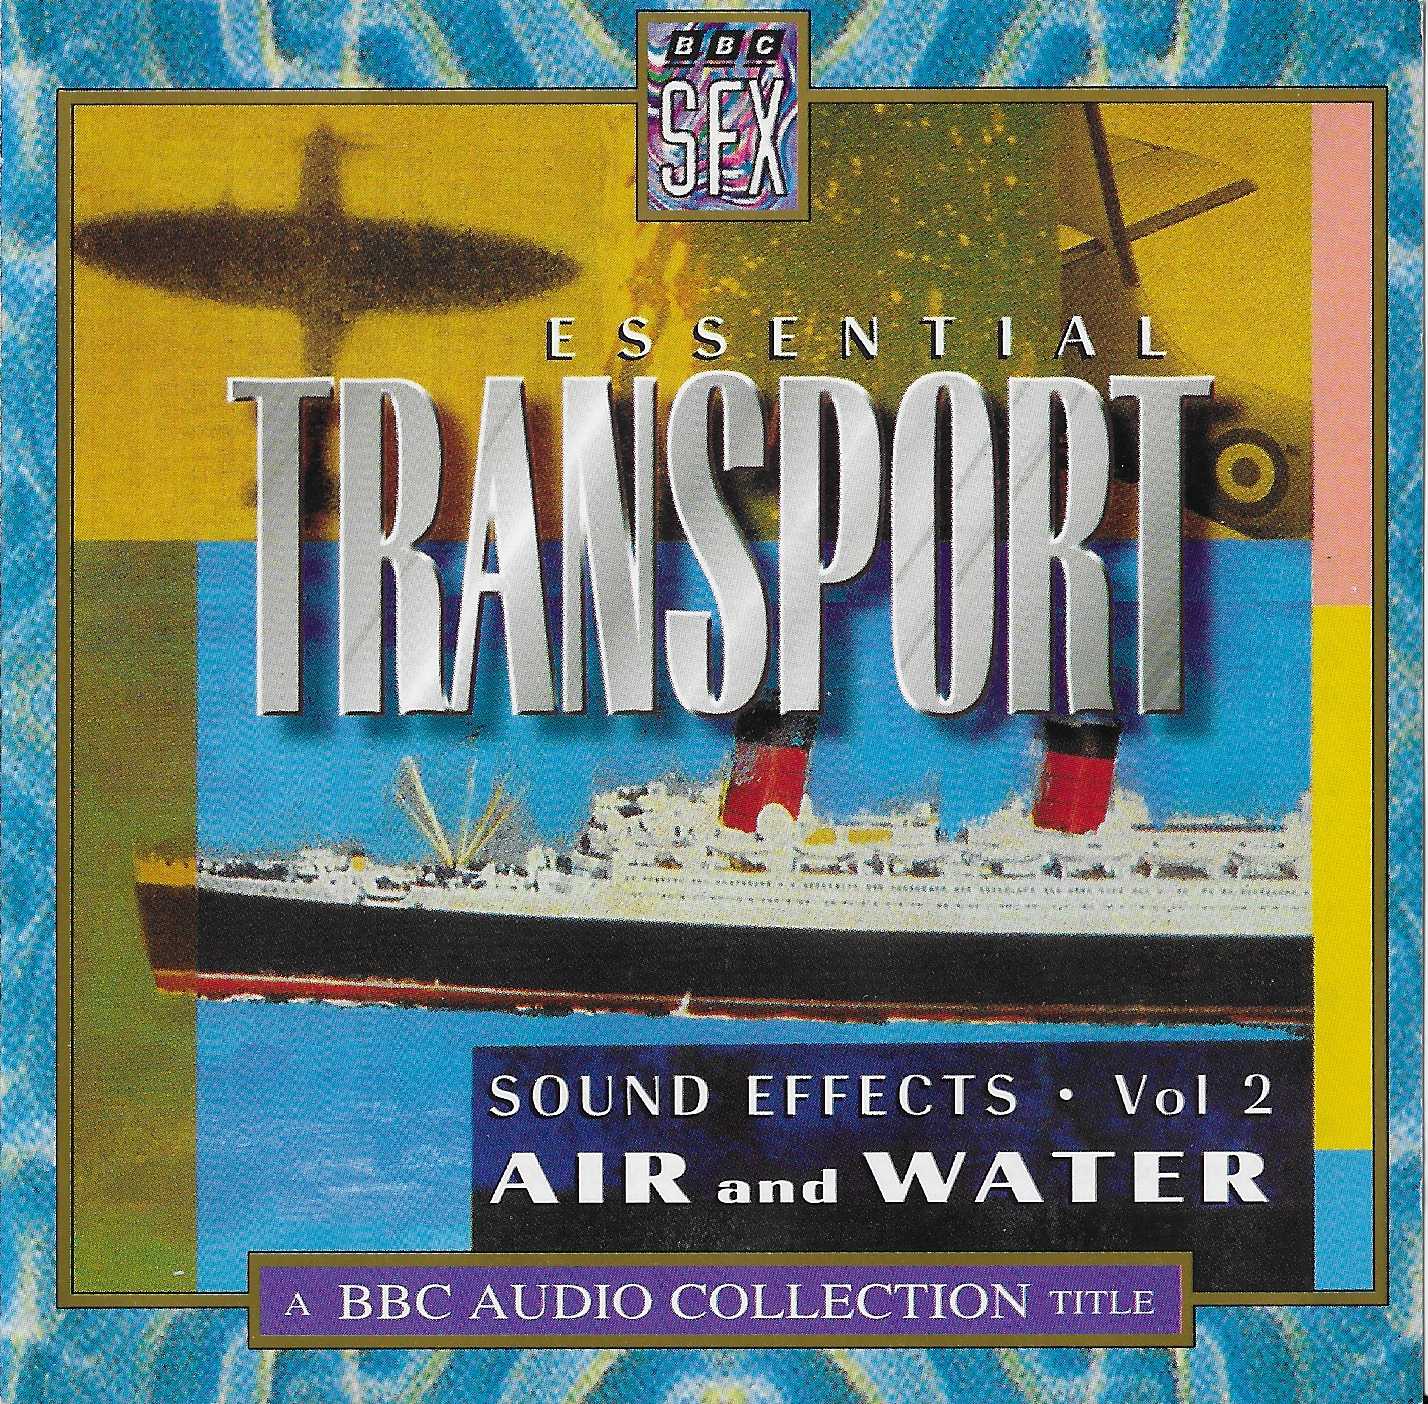 Picture of Essential transport sound effects - Volume 2 by artist Various from the BBC cds - Records and Tapes library